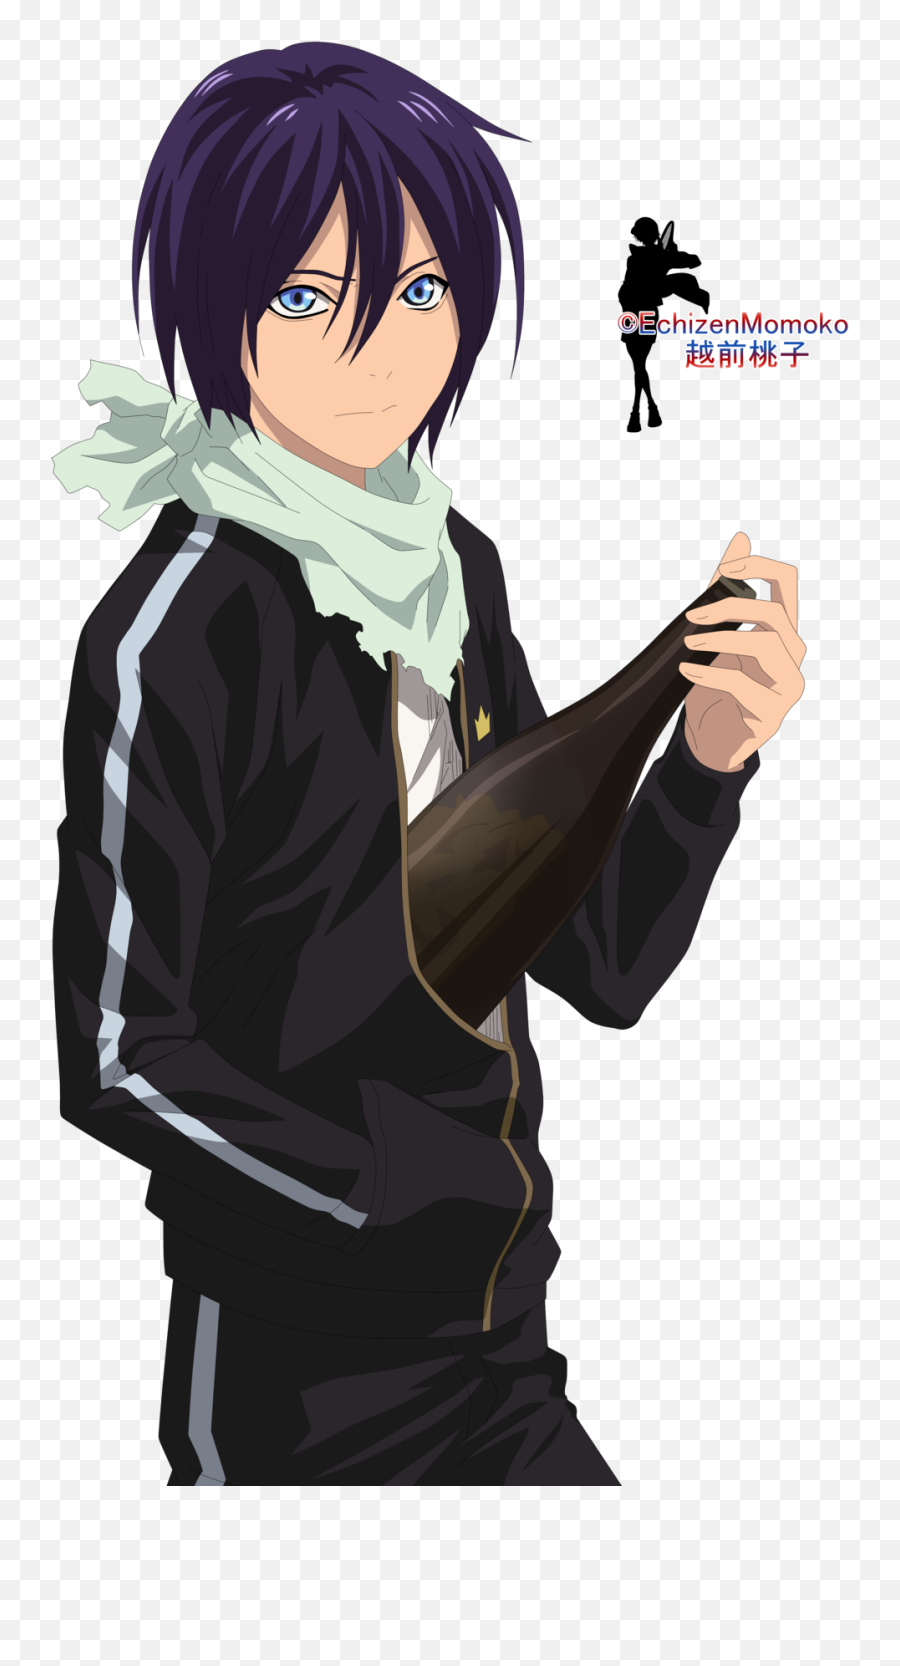 Download Noragami Yato And His Beloved - Transparent Png Yato Png,Yato Transparent